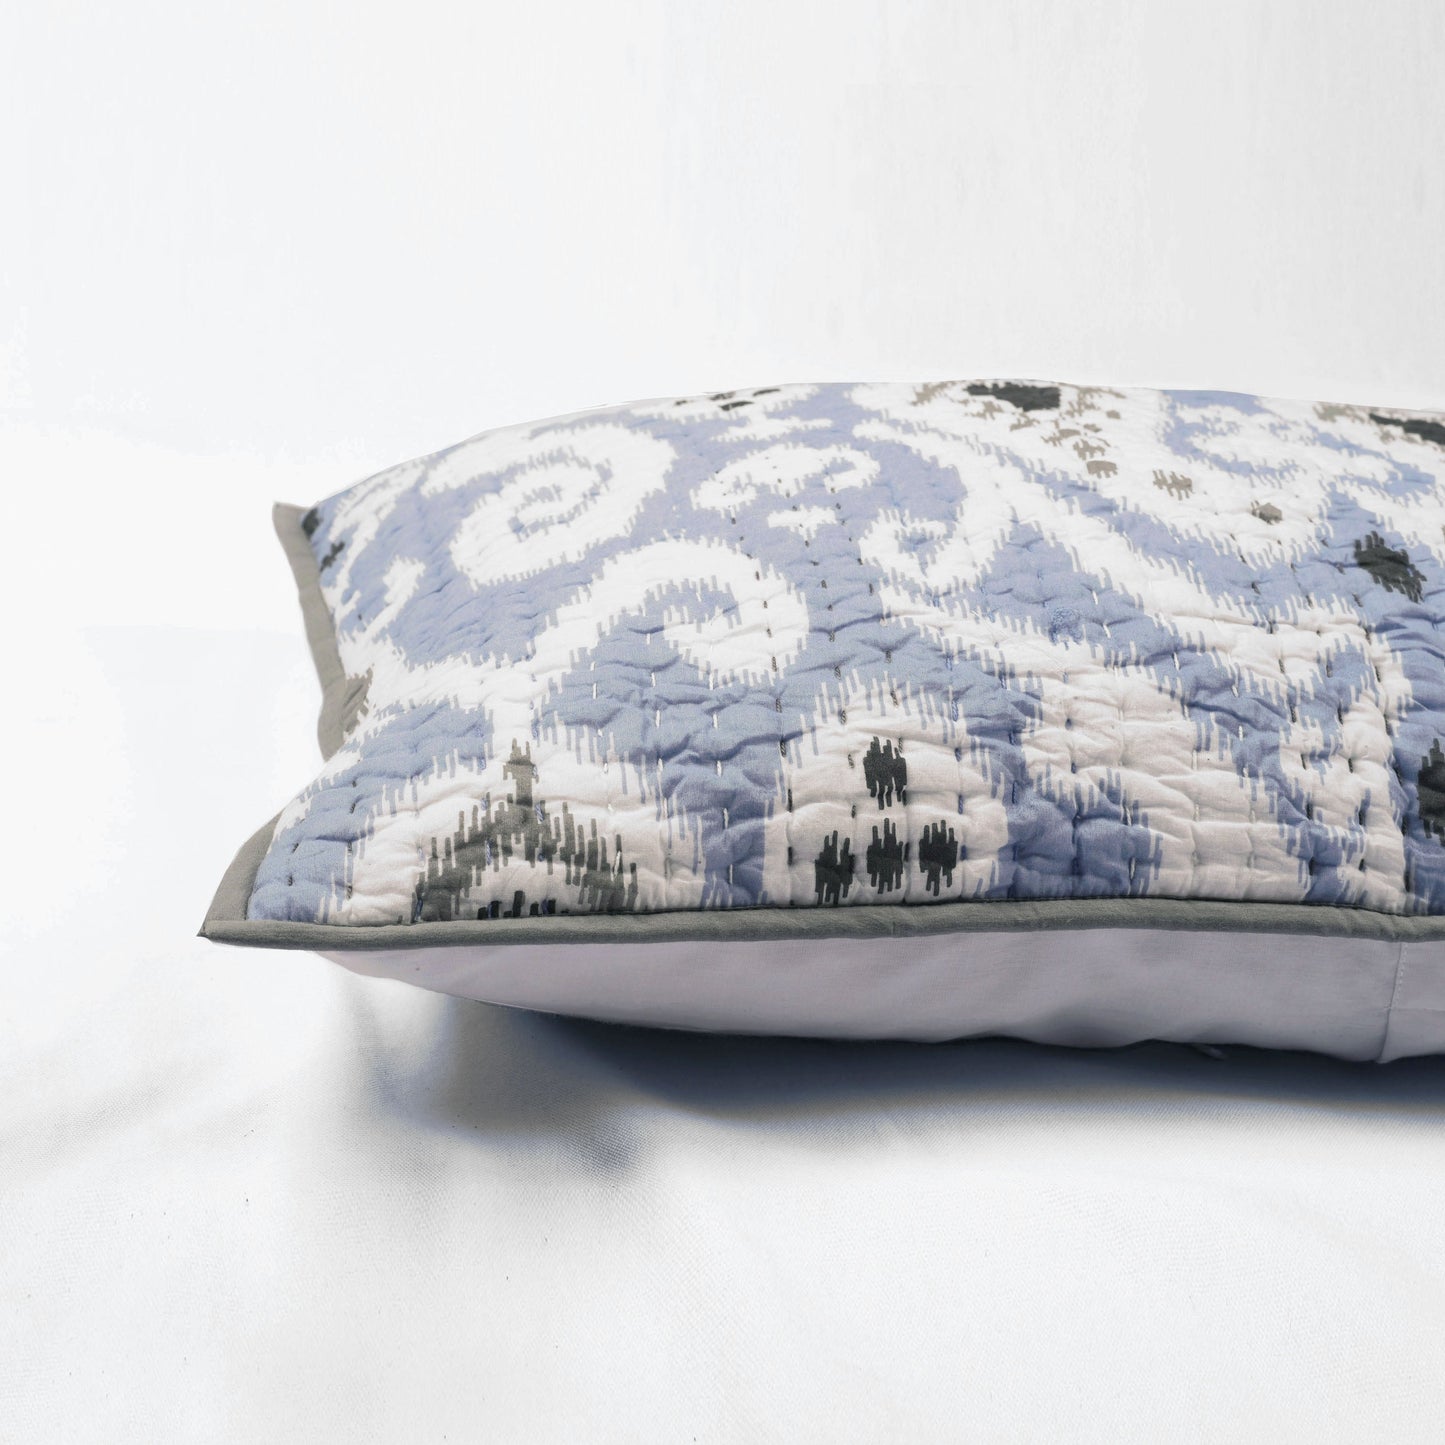 PILLOW SHAM KANTHA - Blue ikat print with stripe pattern quilting, sizes available